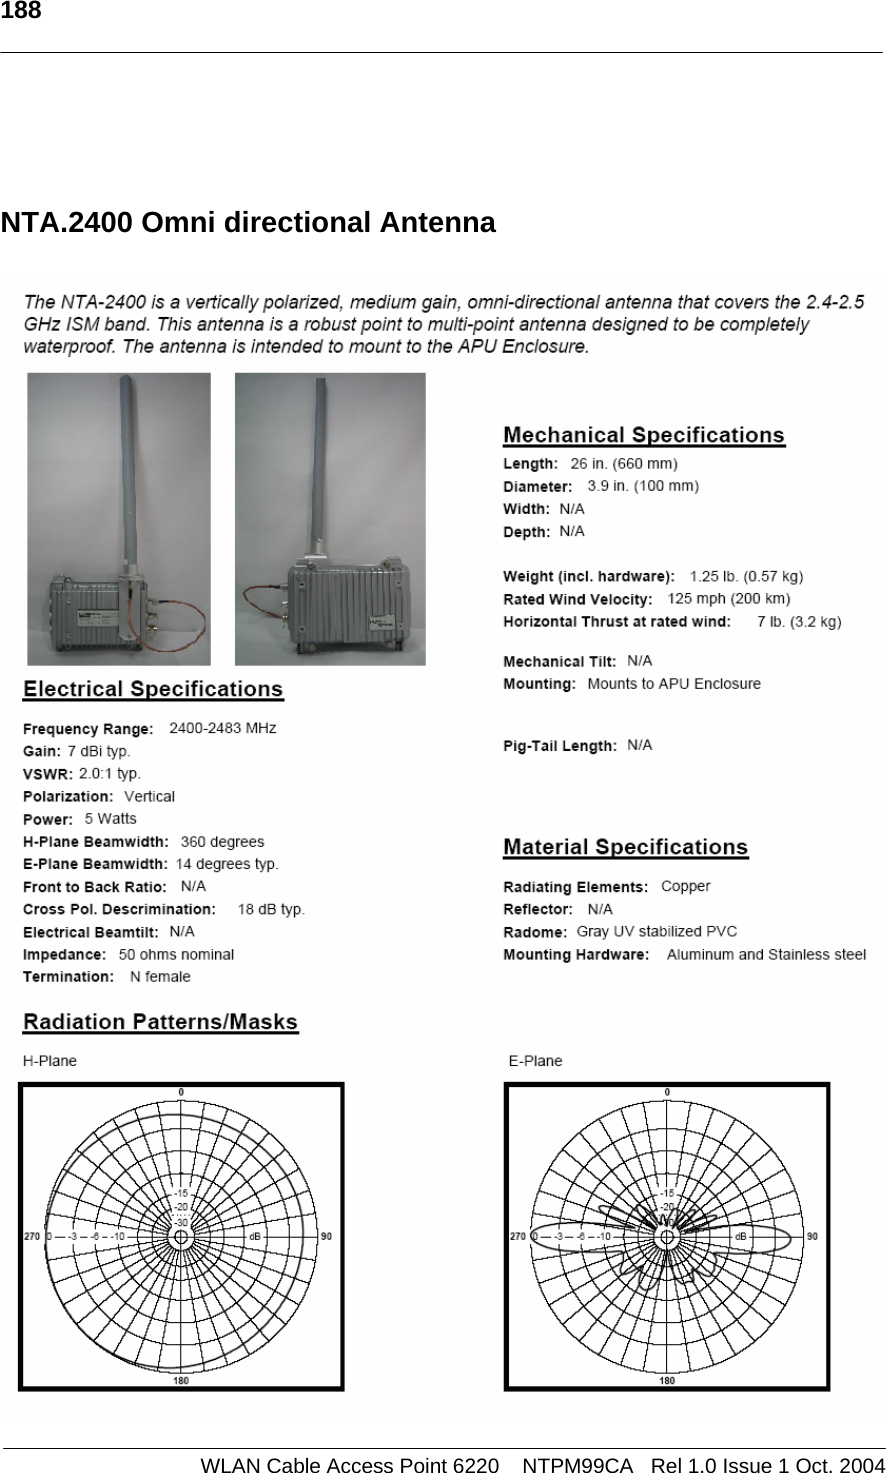   188      NTA.2400 Omni directional Antenna    WLAN Cable Access Point 6220    NTPM99CA   Rel 1.0 Issue 1 Oct. 2004